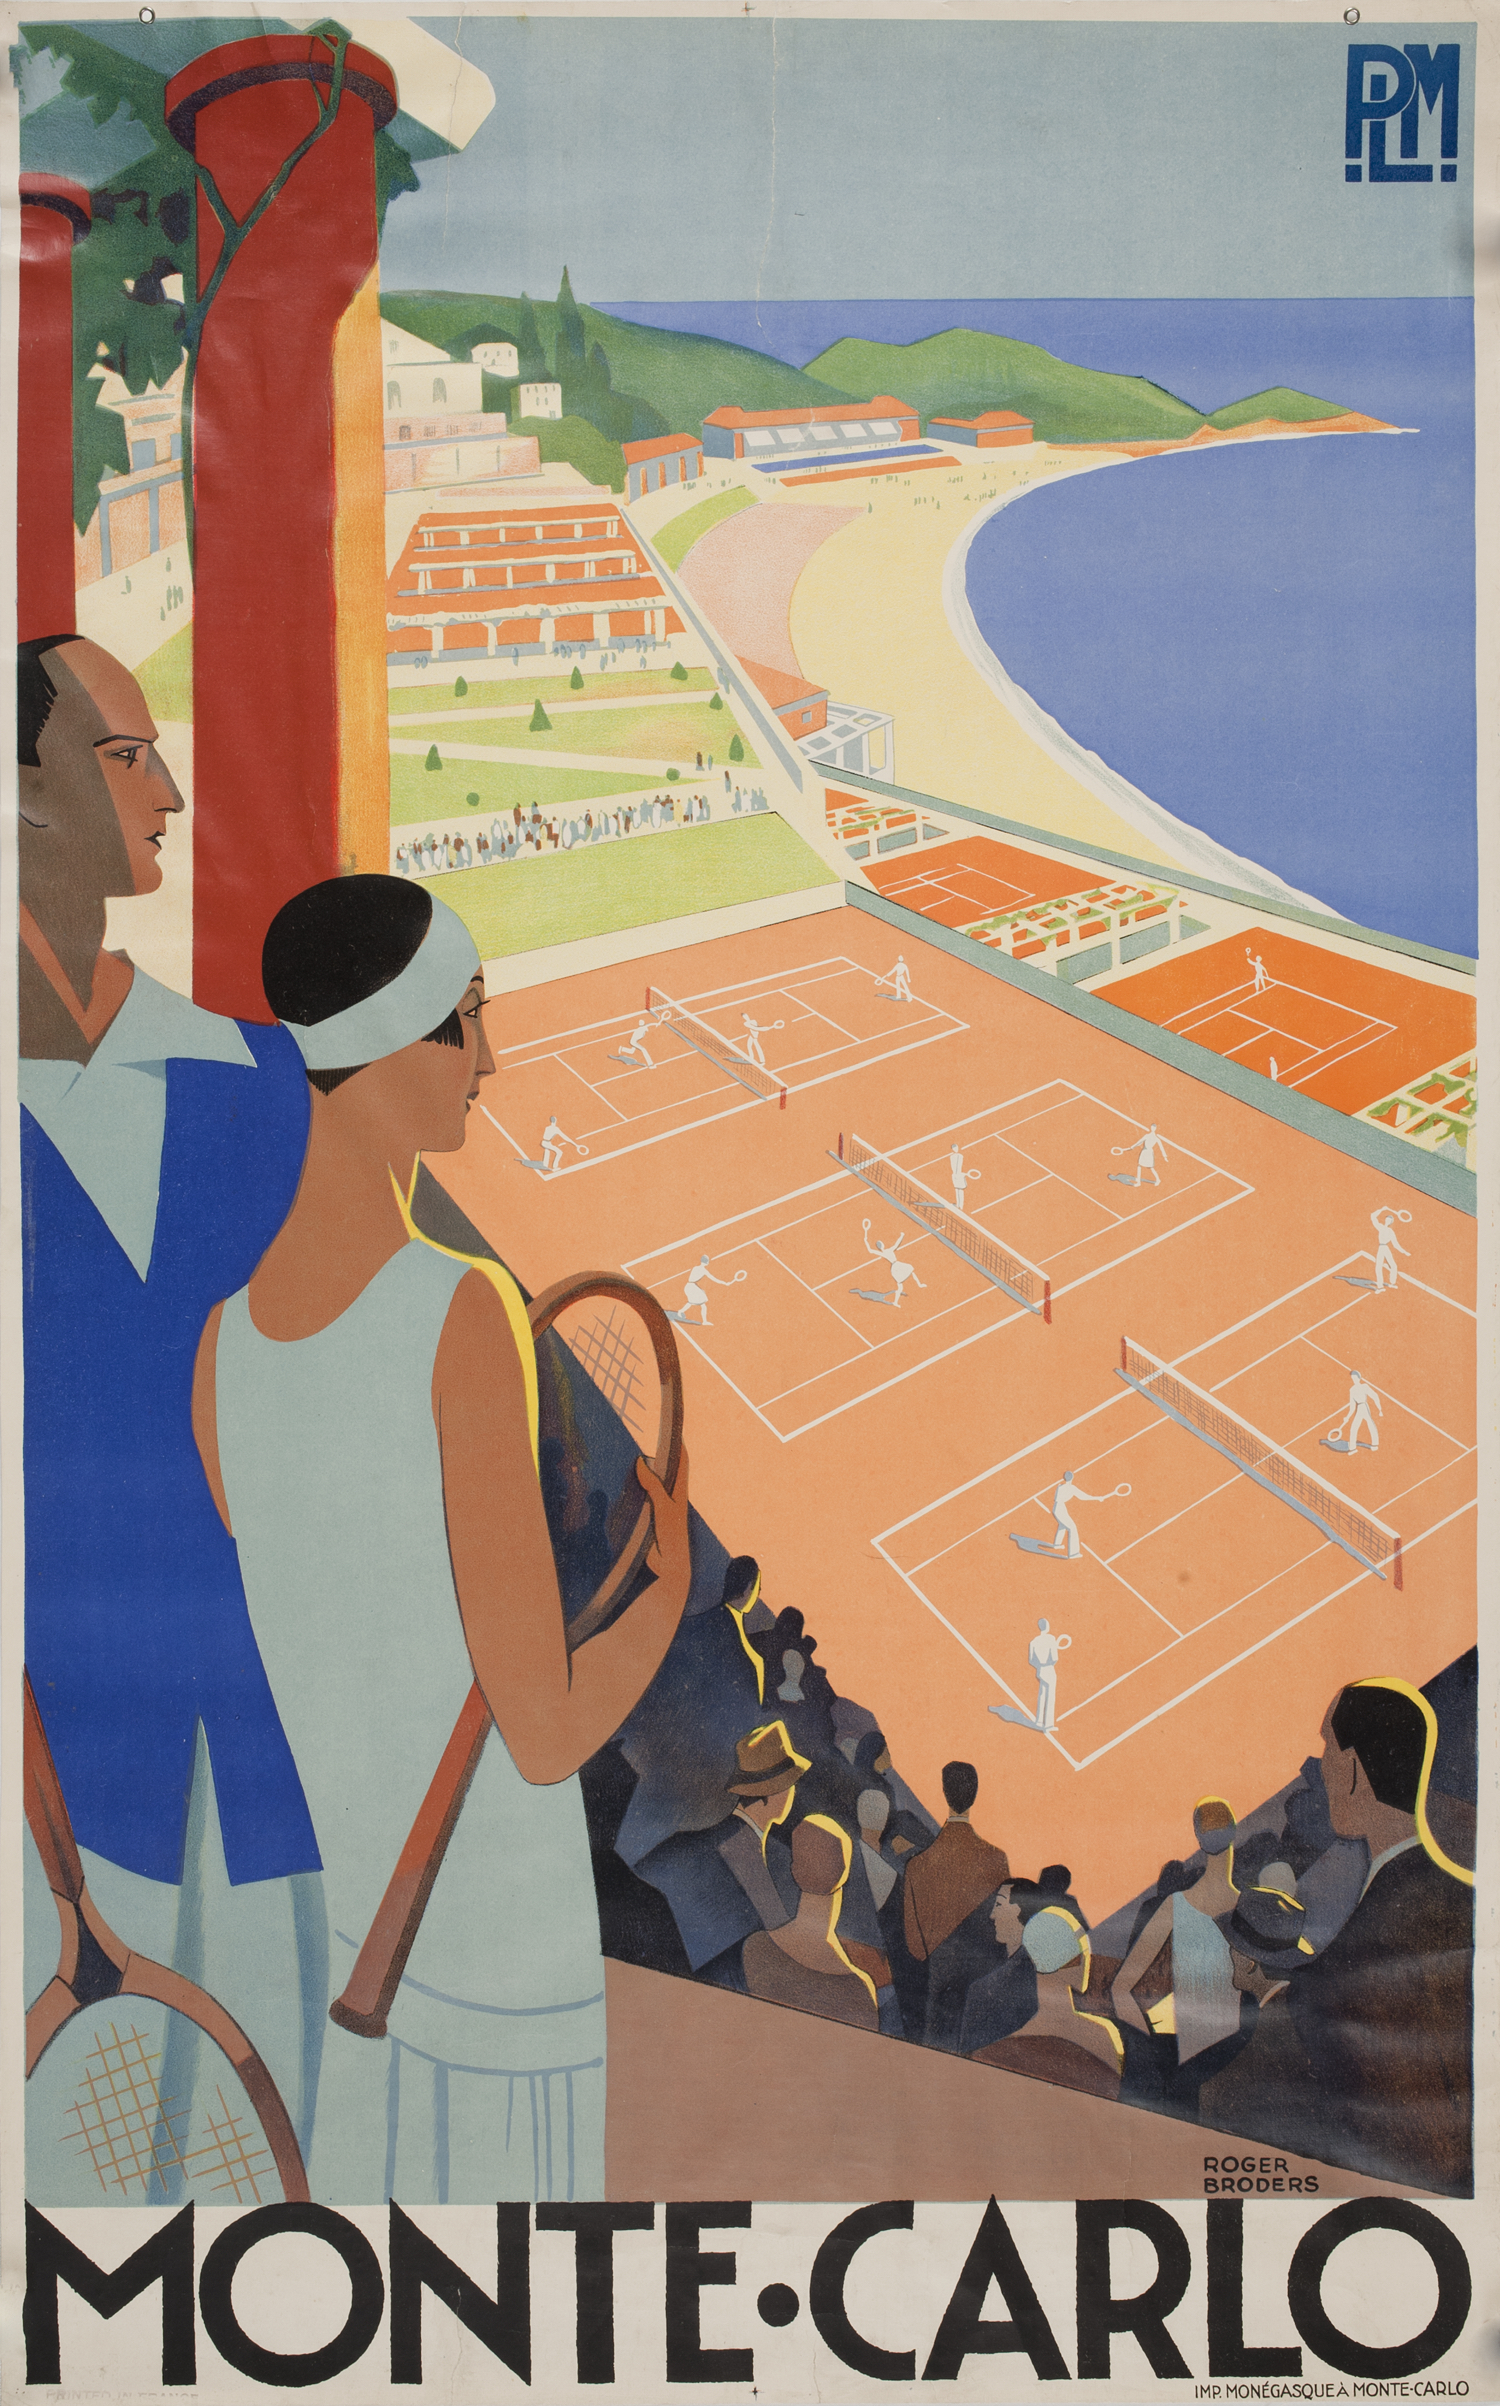 Monte-Carlo print of two people looking at tennis courts